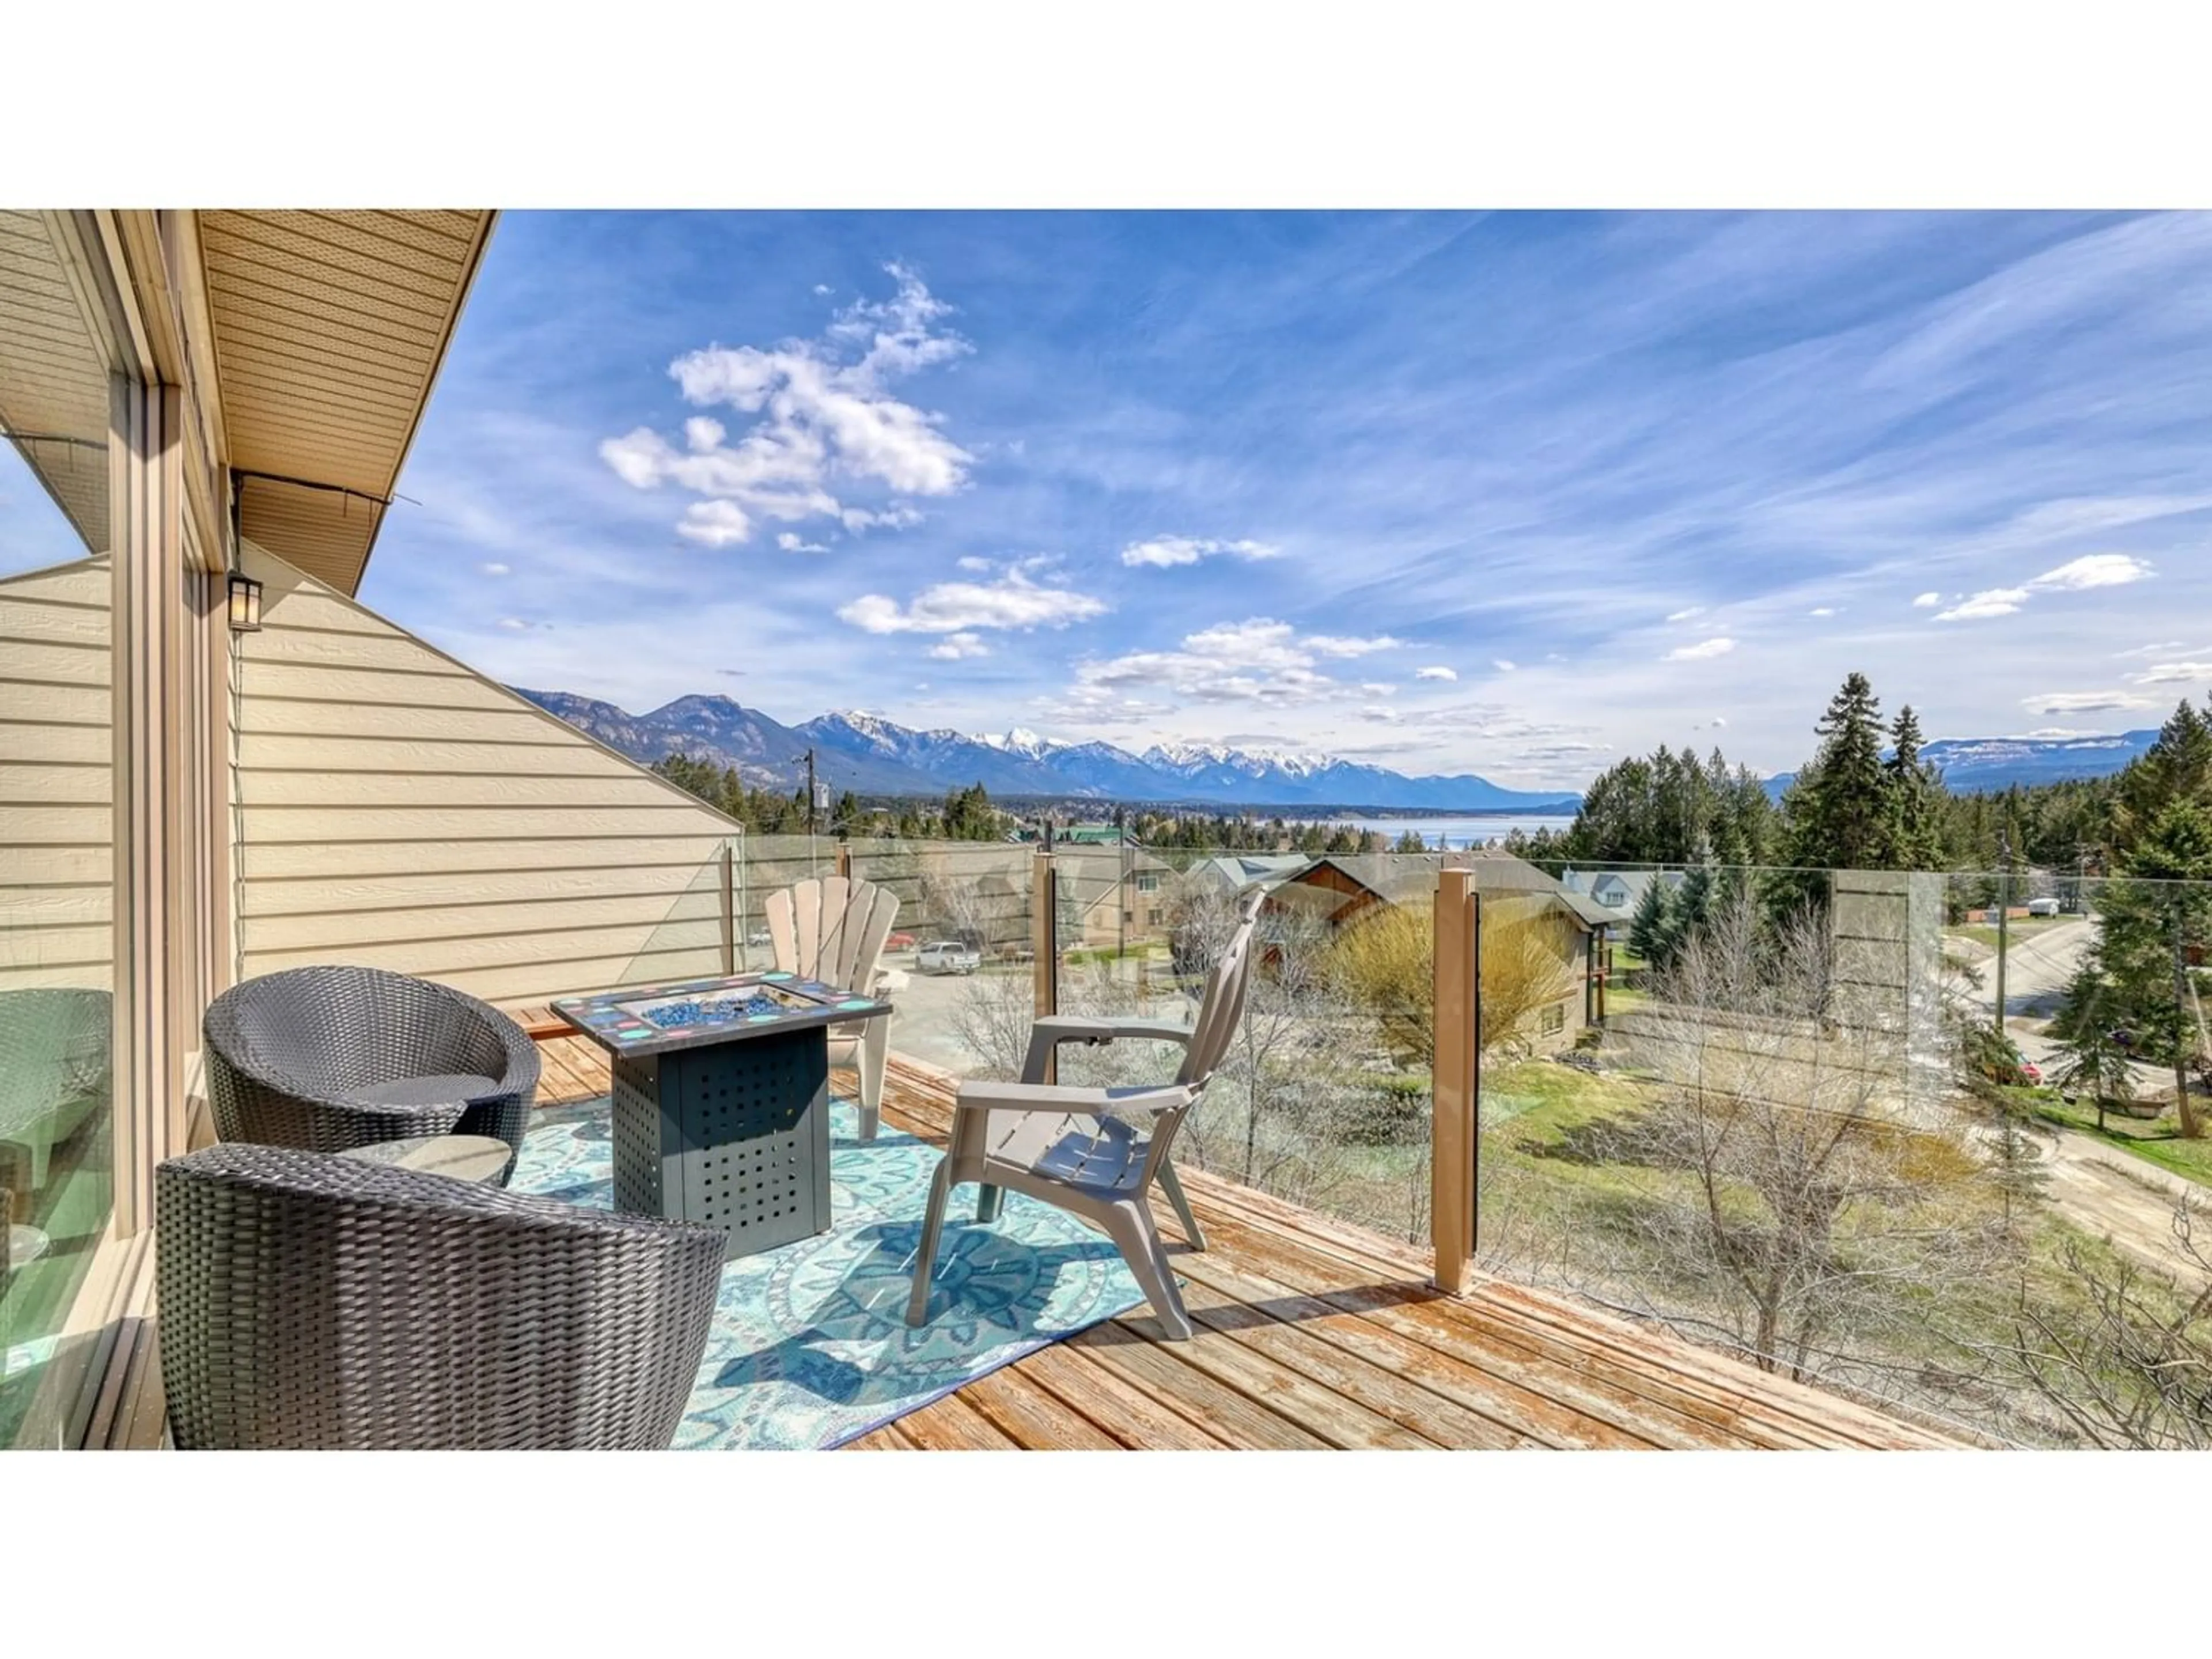 Lakeview for 804 15TH STREET, Invermere British Columbia V0A1K4